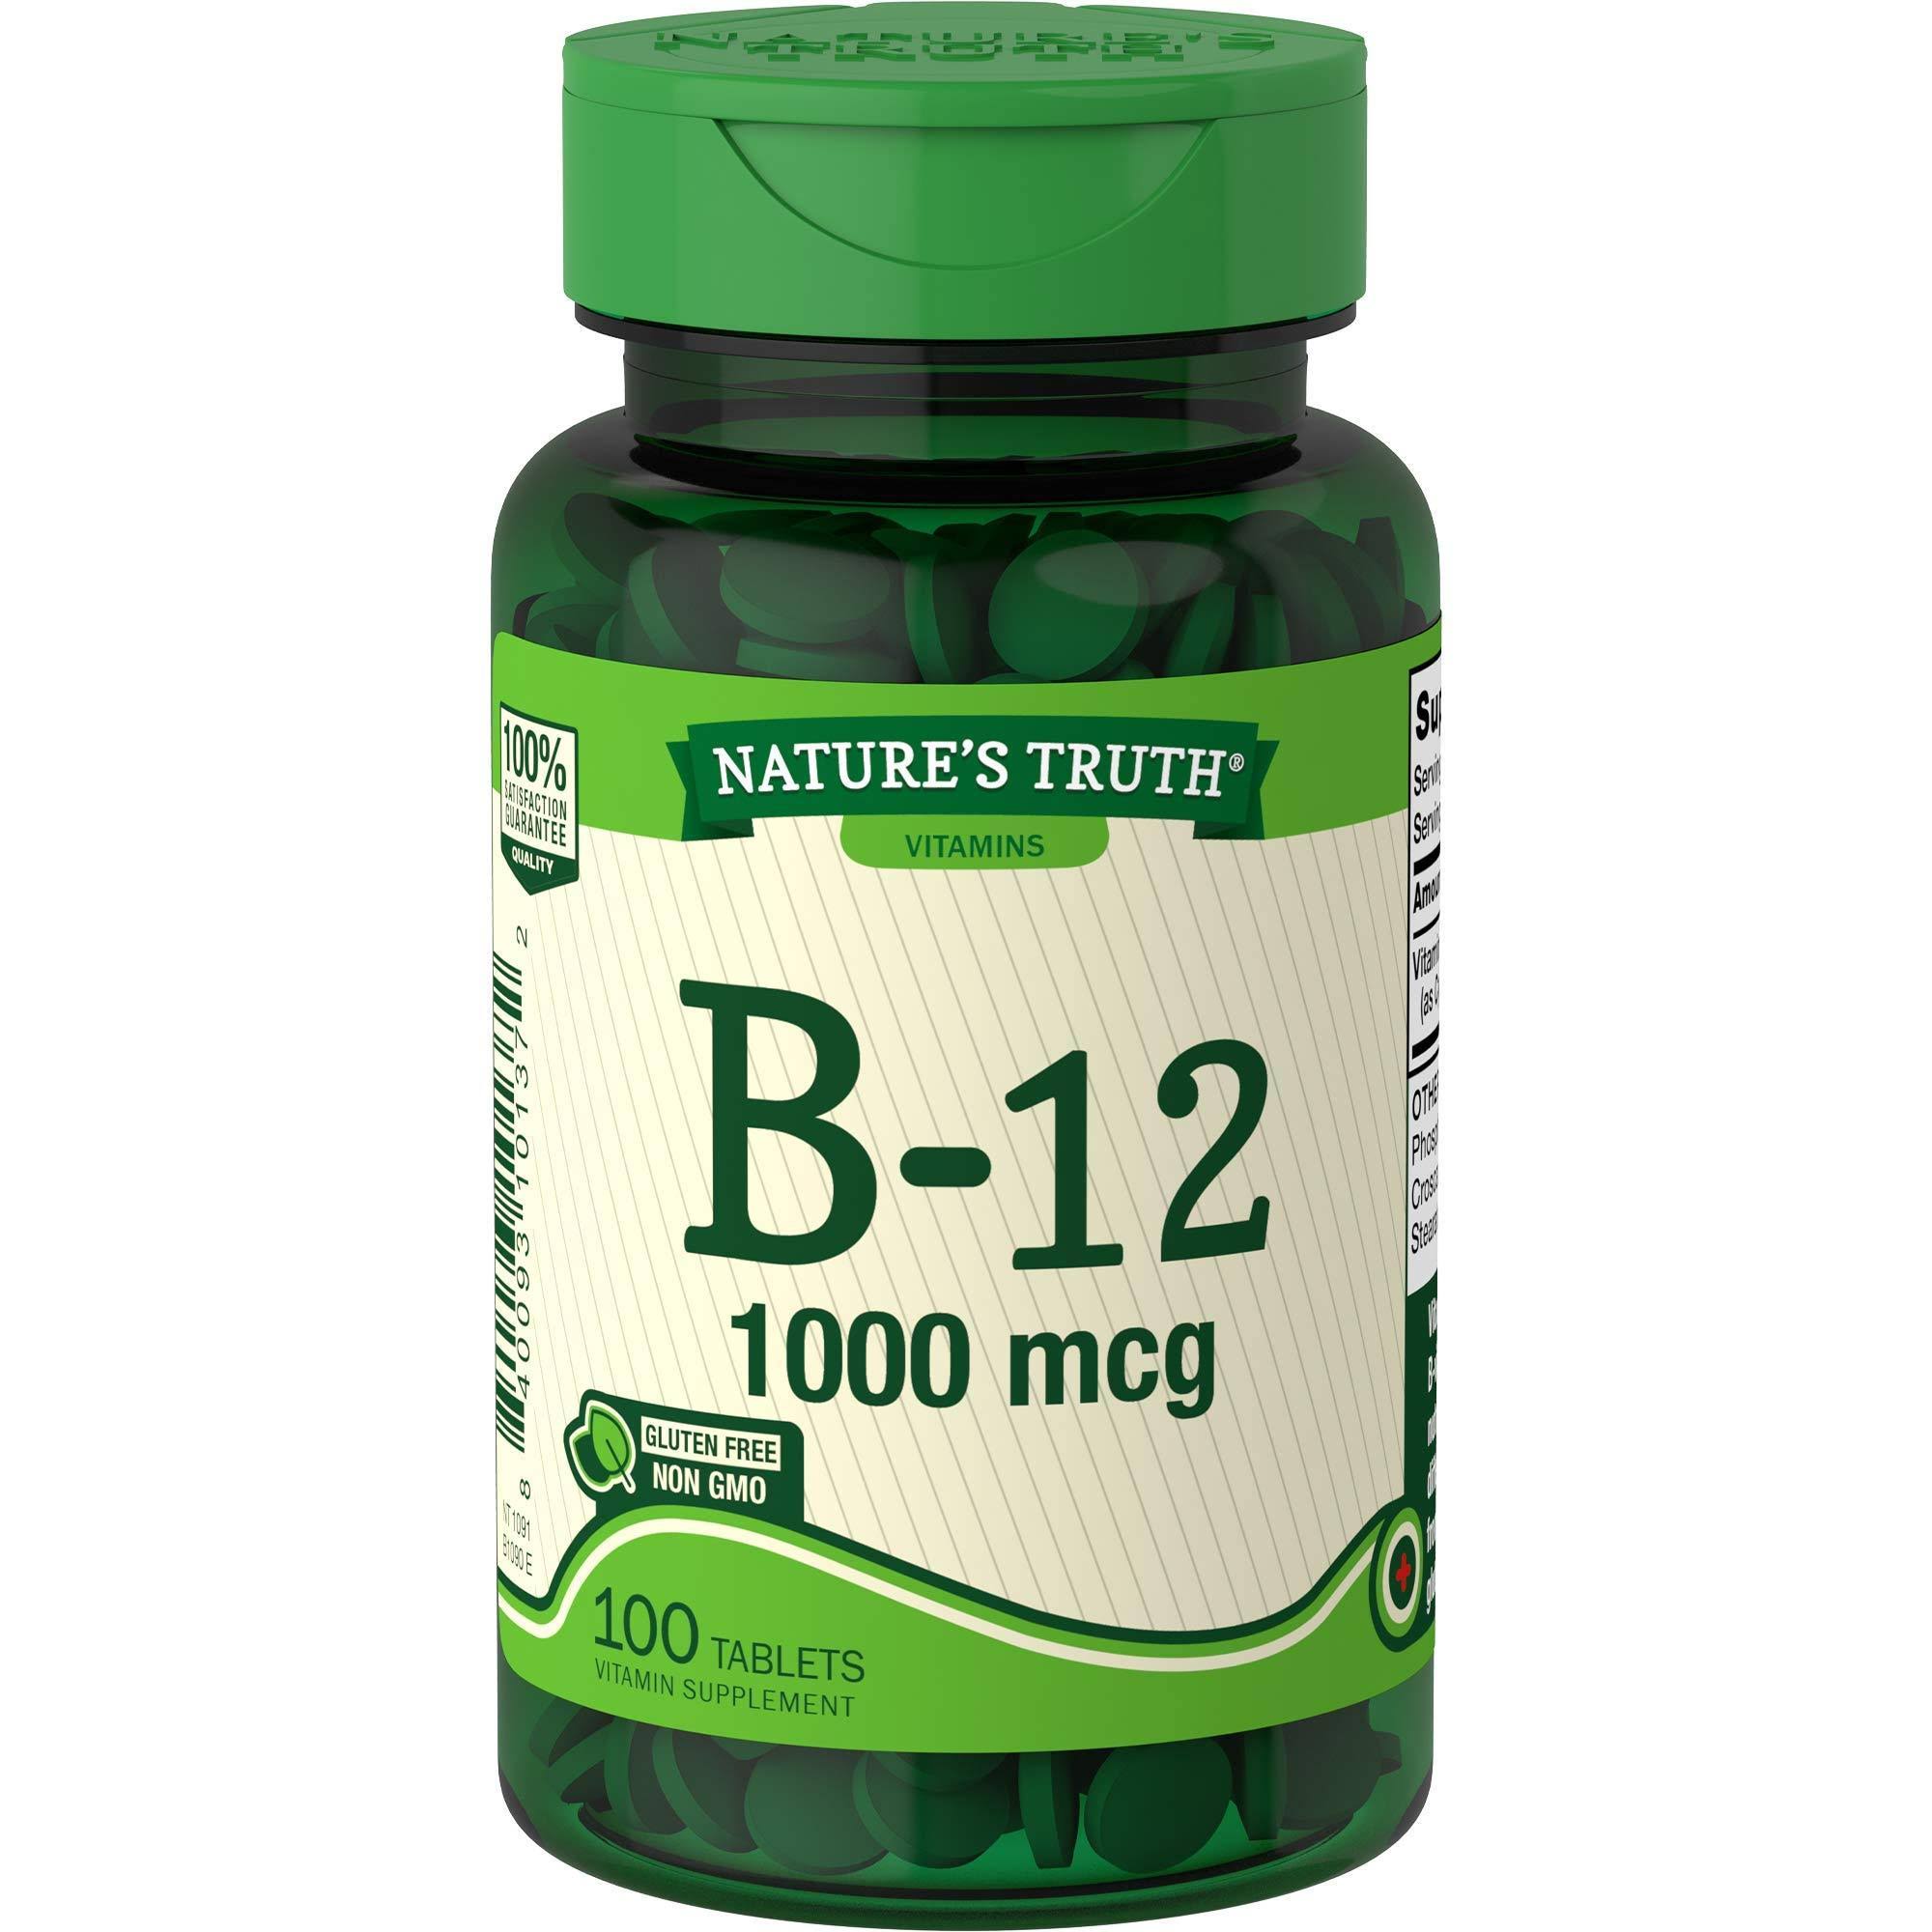 Nature's Truth B-12 1000 mcg, 100 Count (Value Pack of 2)